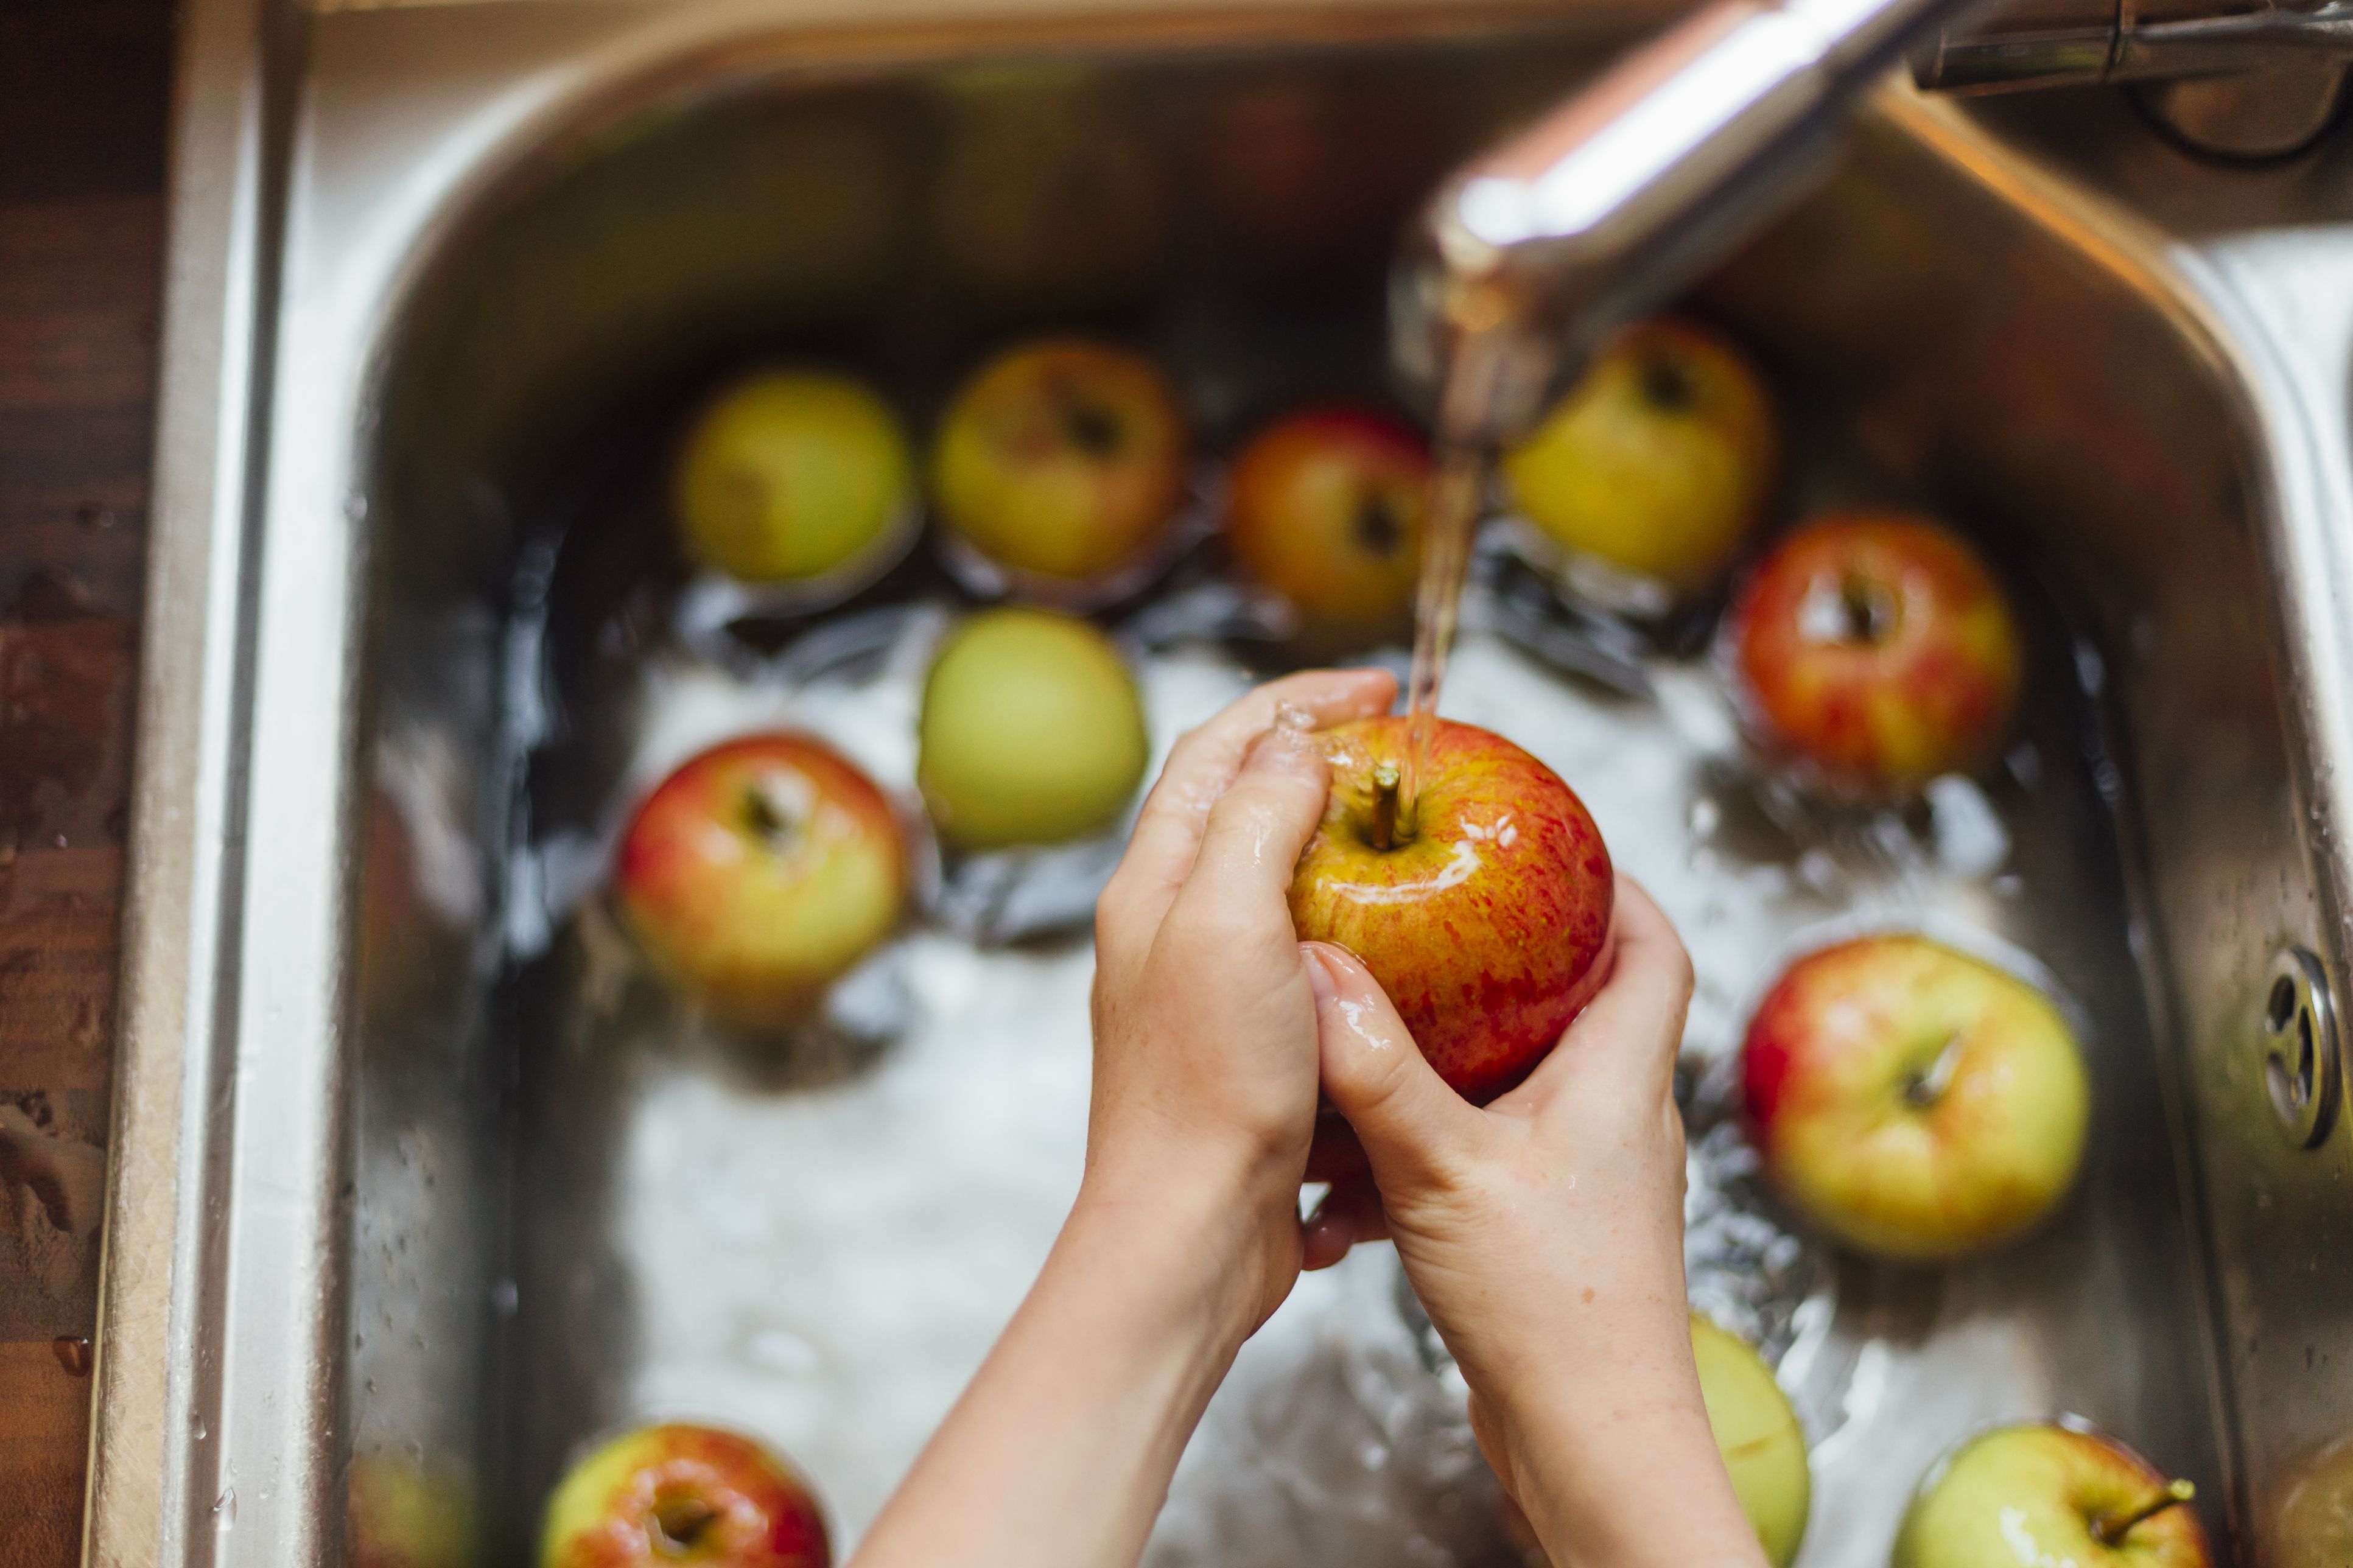 Do you need to wash fruits and vegetables?